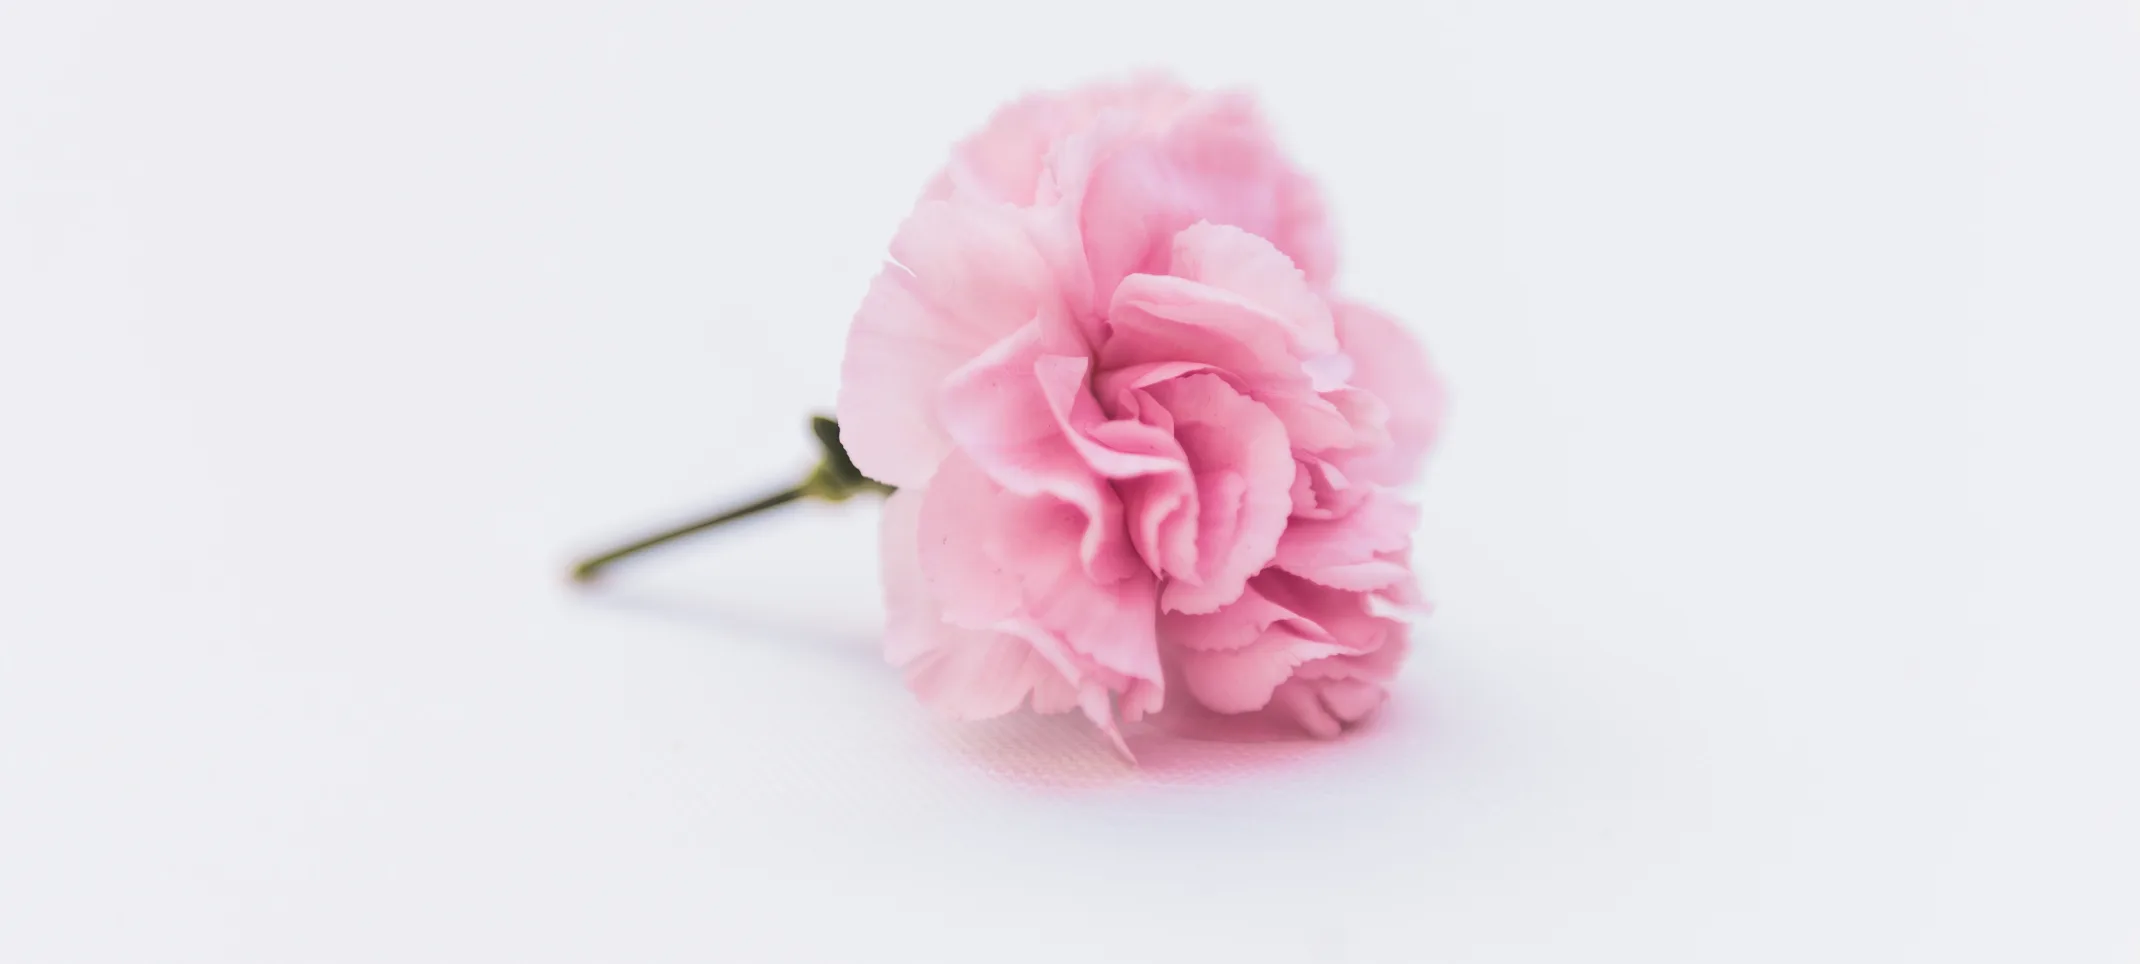 A single pink flower sitting on a light gray table